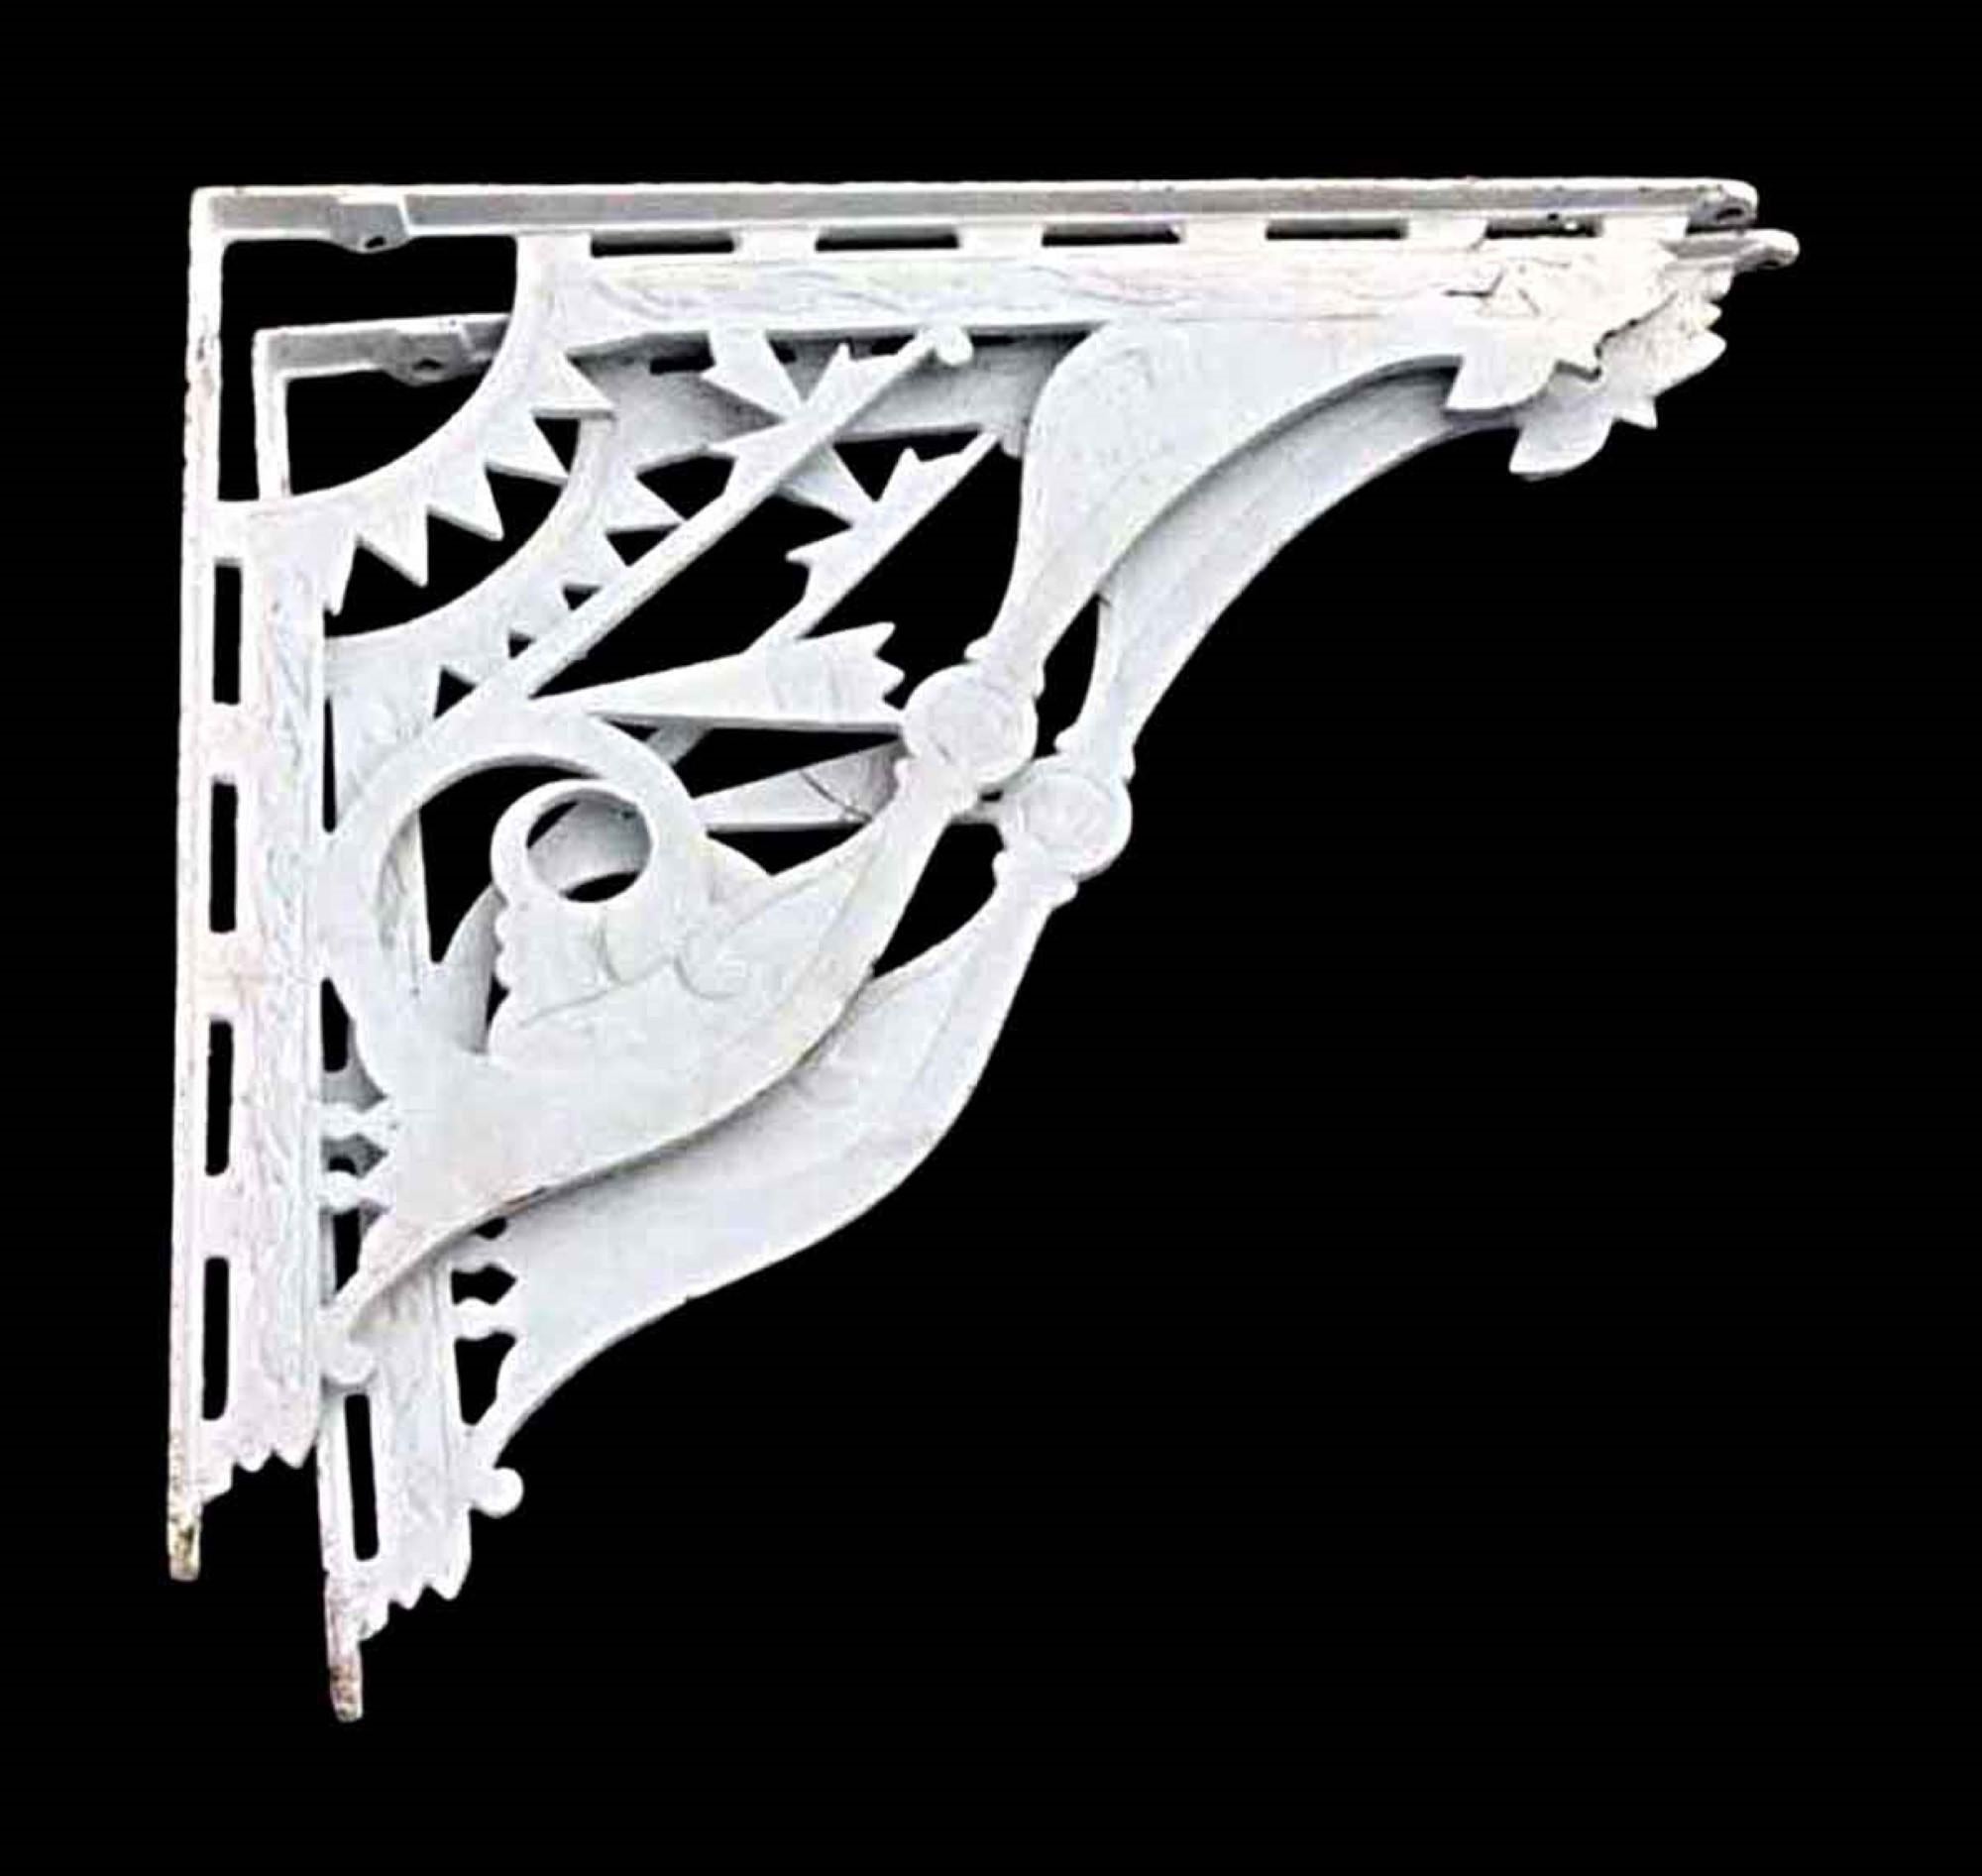 Antique Eastlake cast iron shelf brackets from the 1890s painted white. Sold as a pair. This can be seen at our 400 Gilligan St location in Scranton, PA.